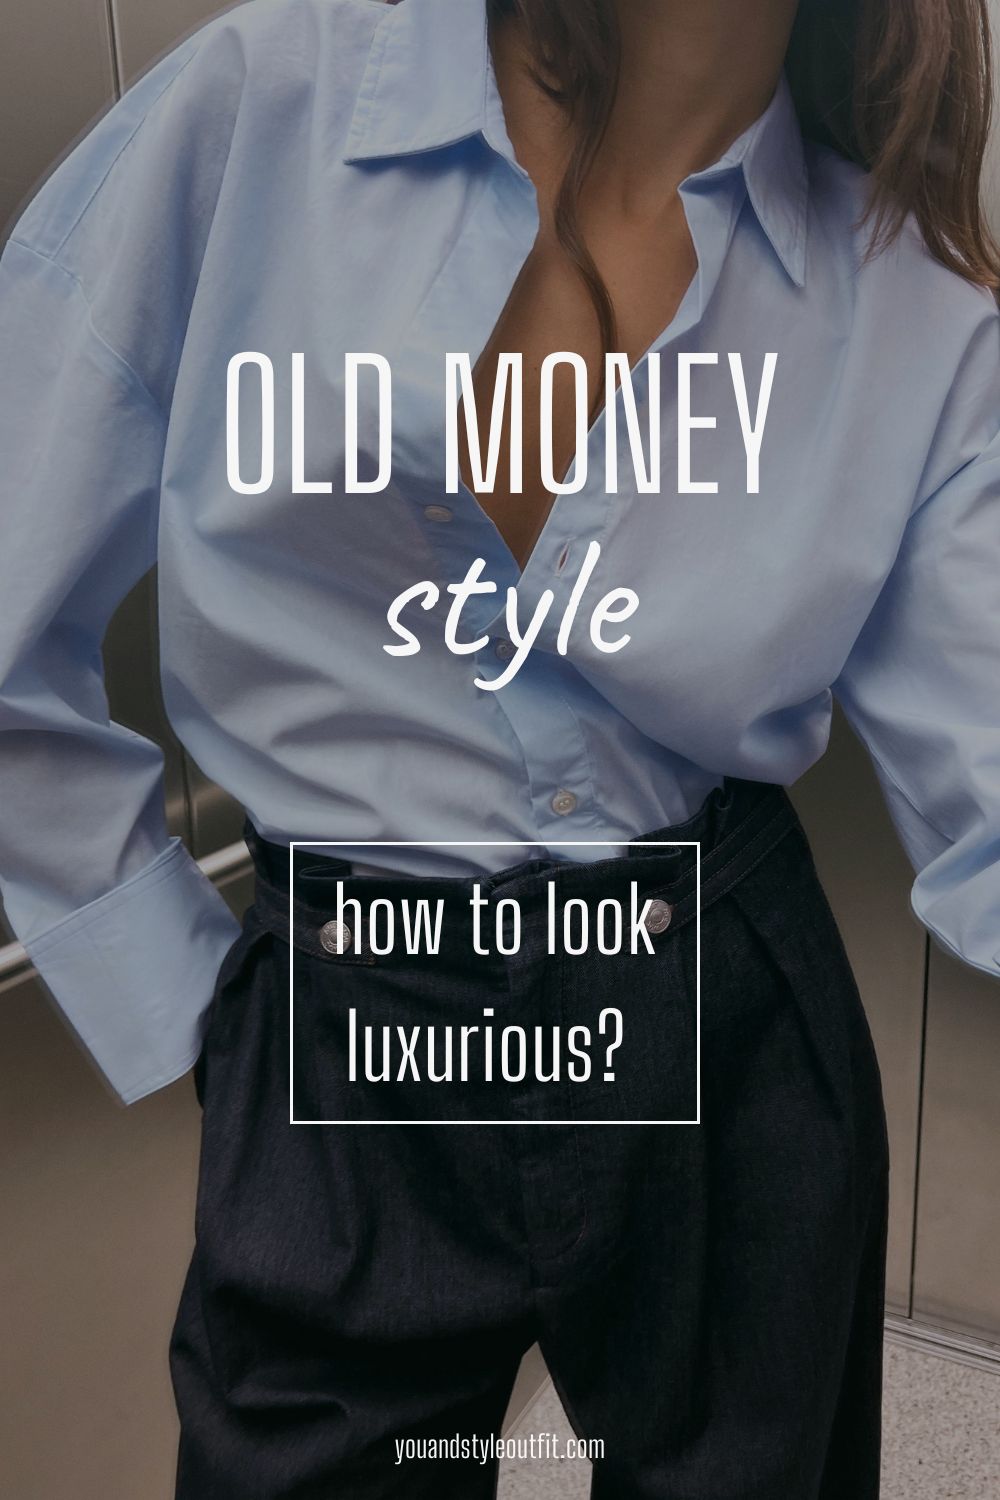 Old Money Style. How to look luxurious?